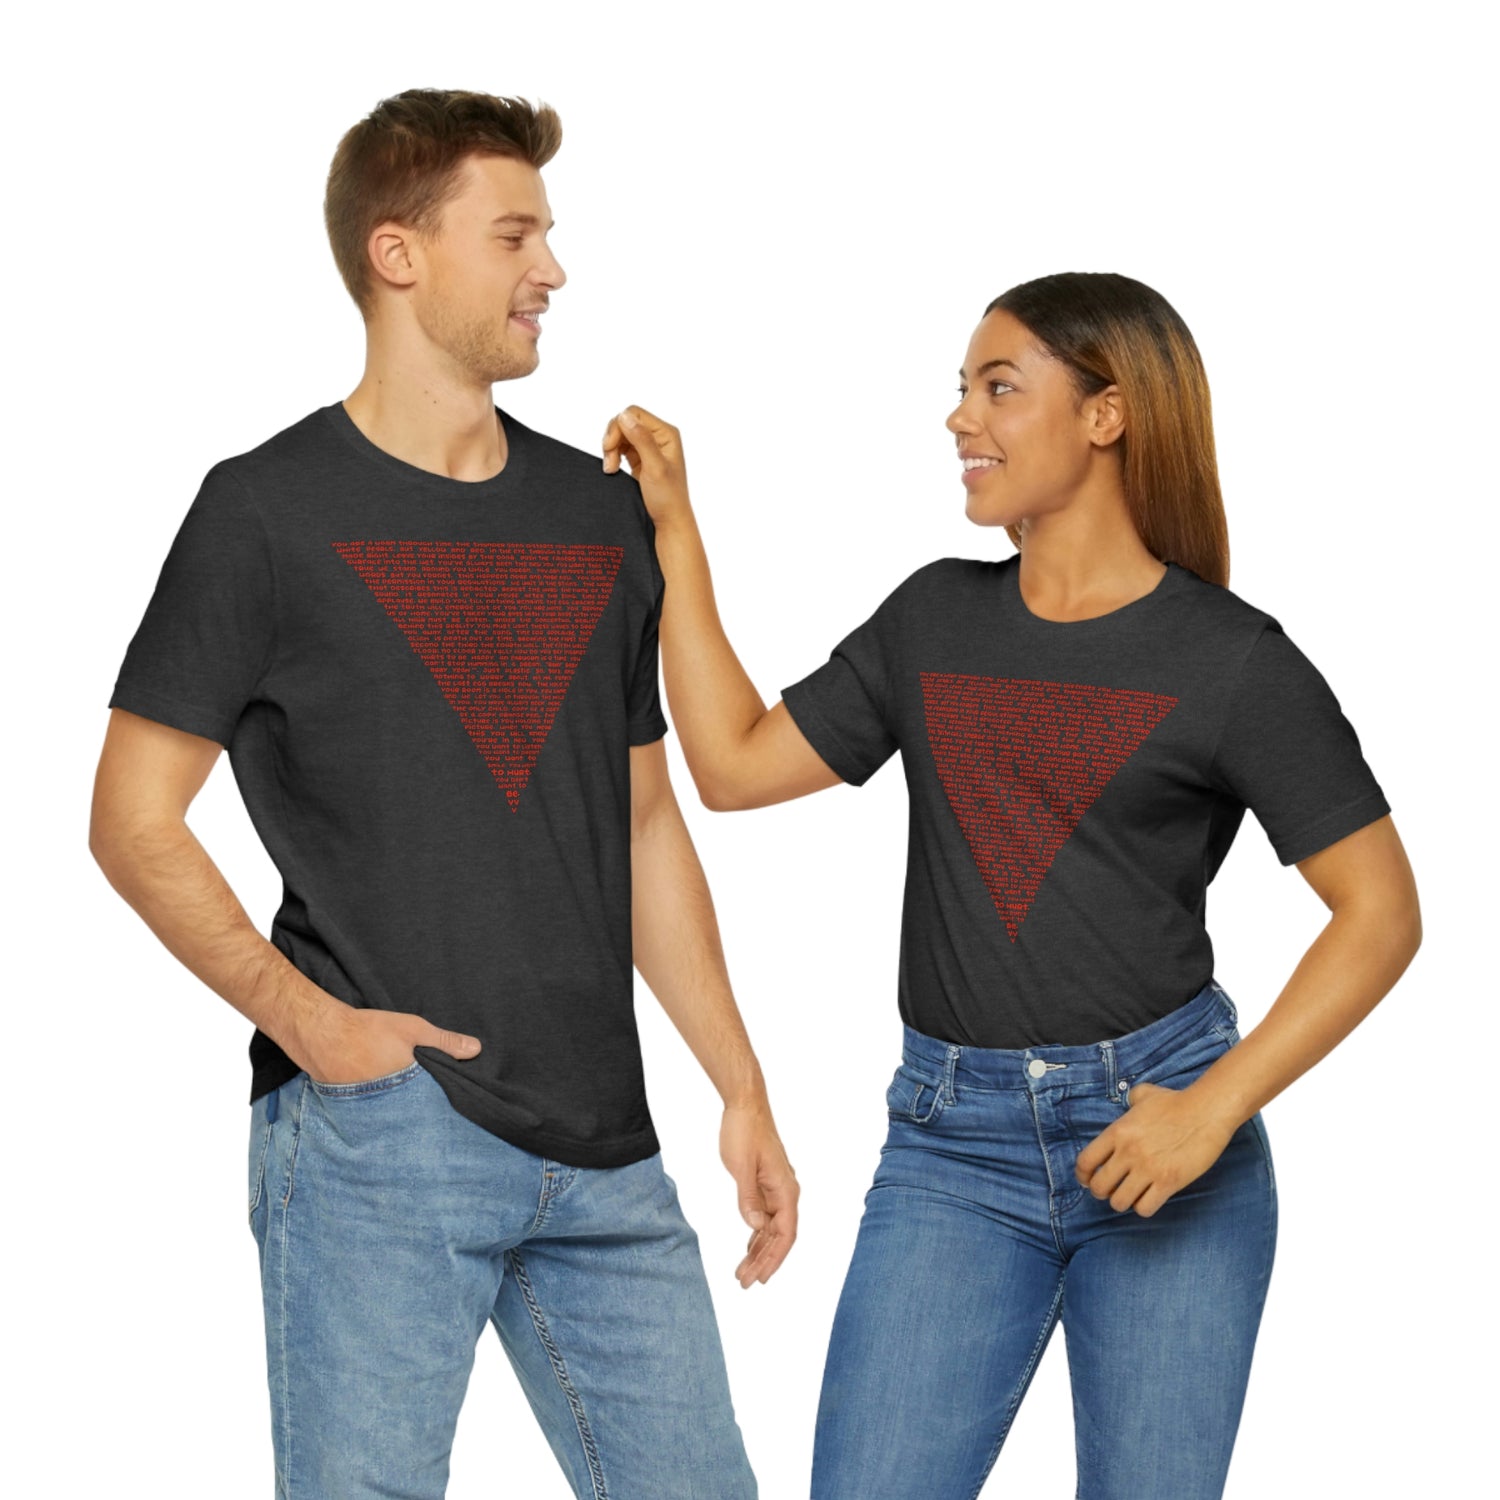 Control Inspired HISS mantra shirt Lord and Lady Towers